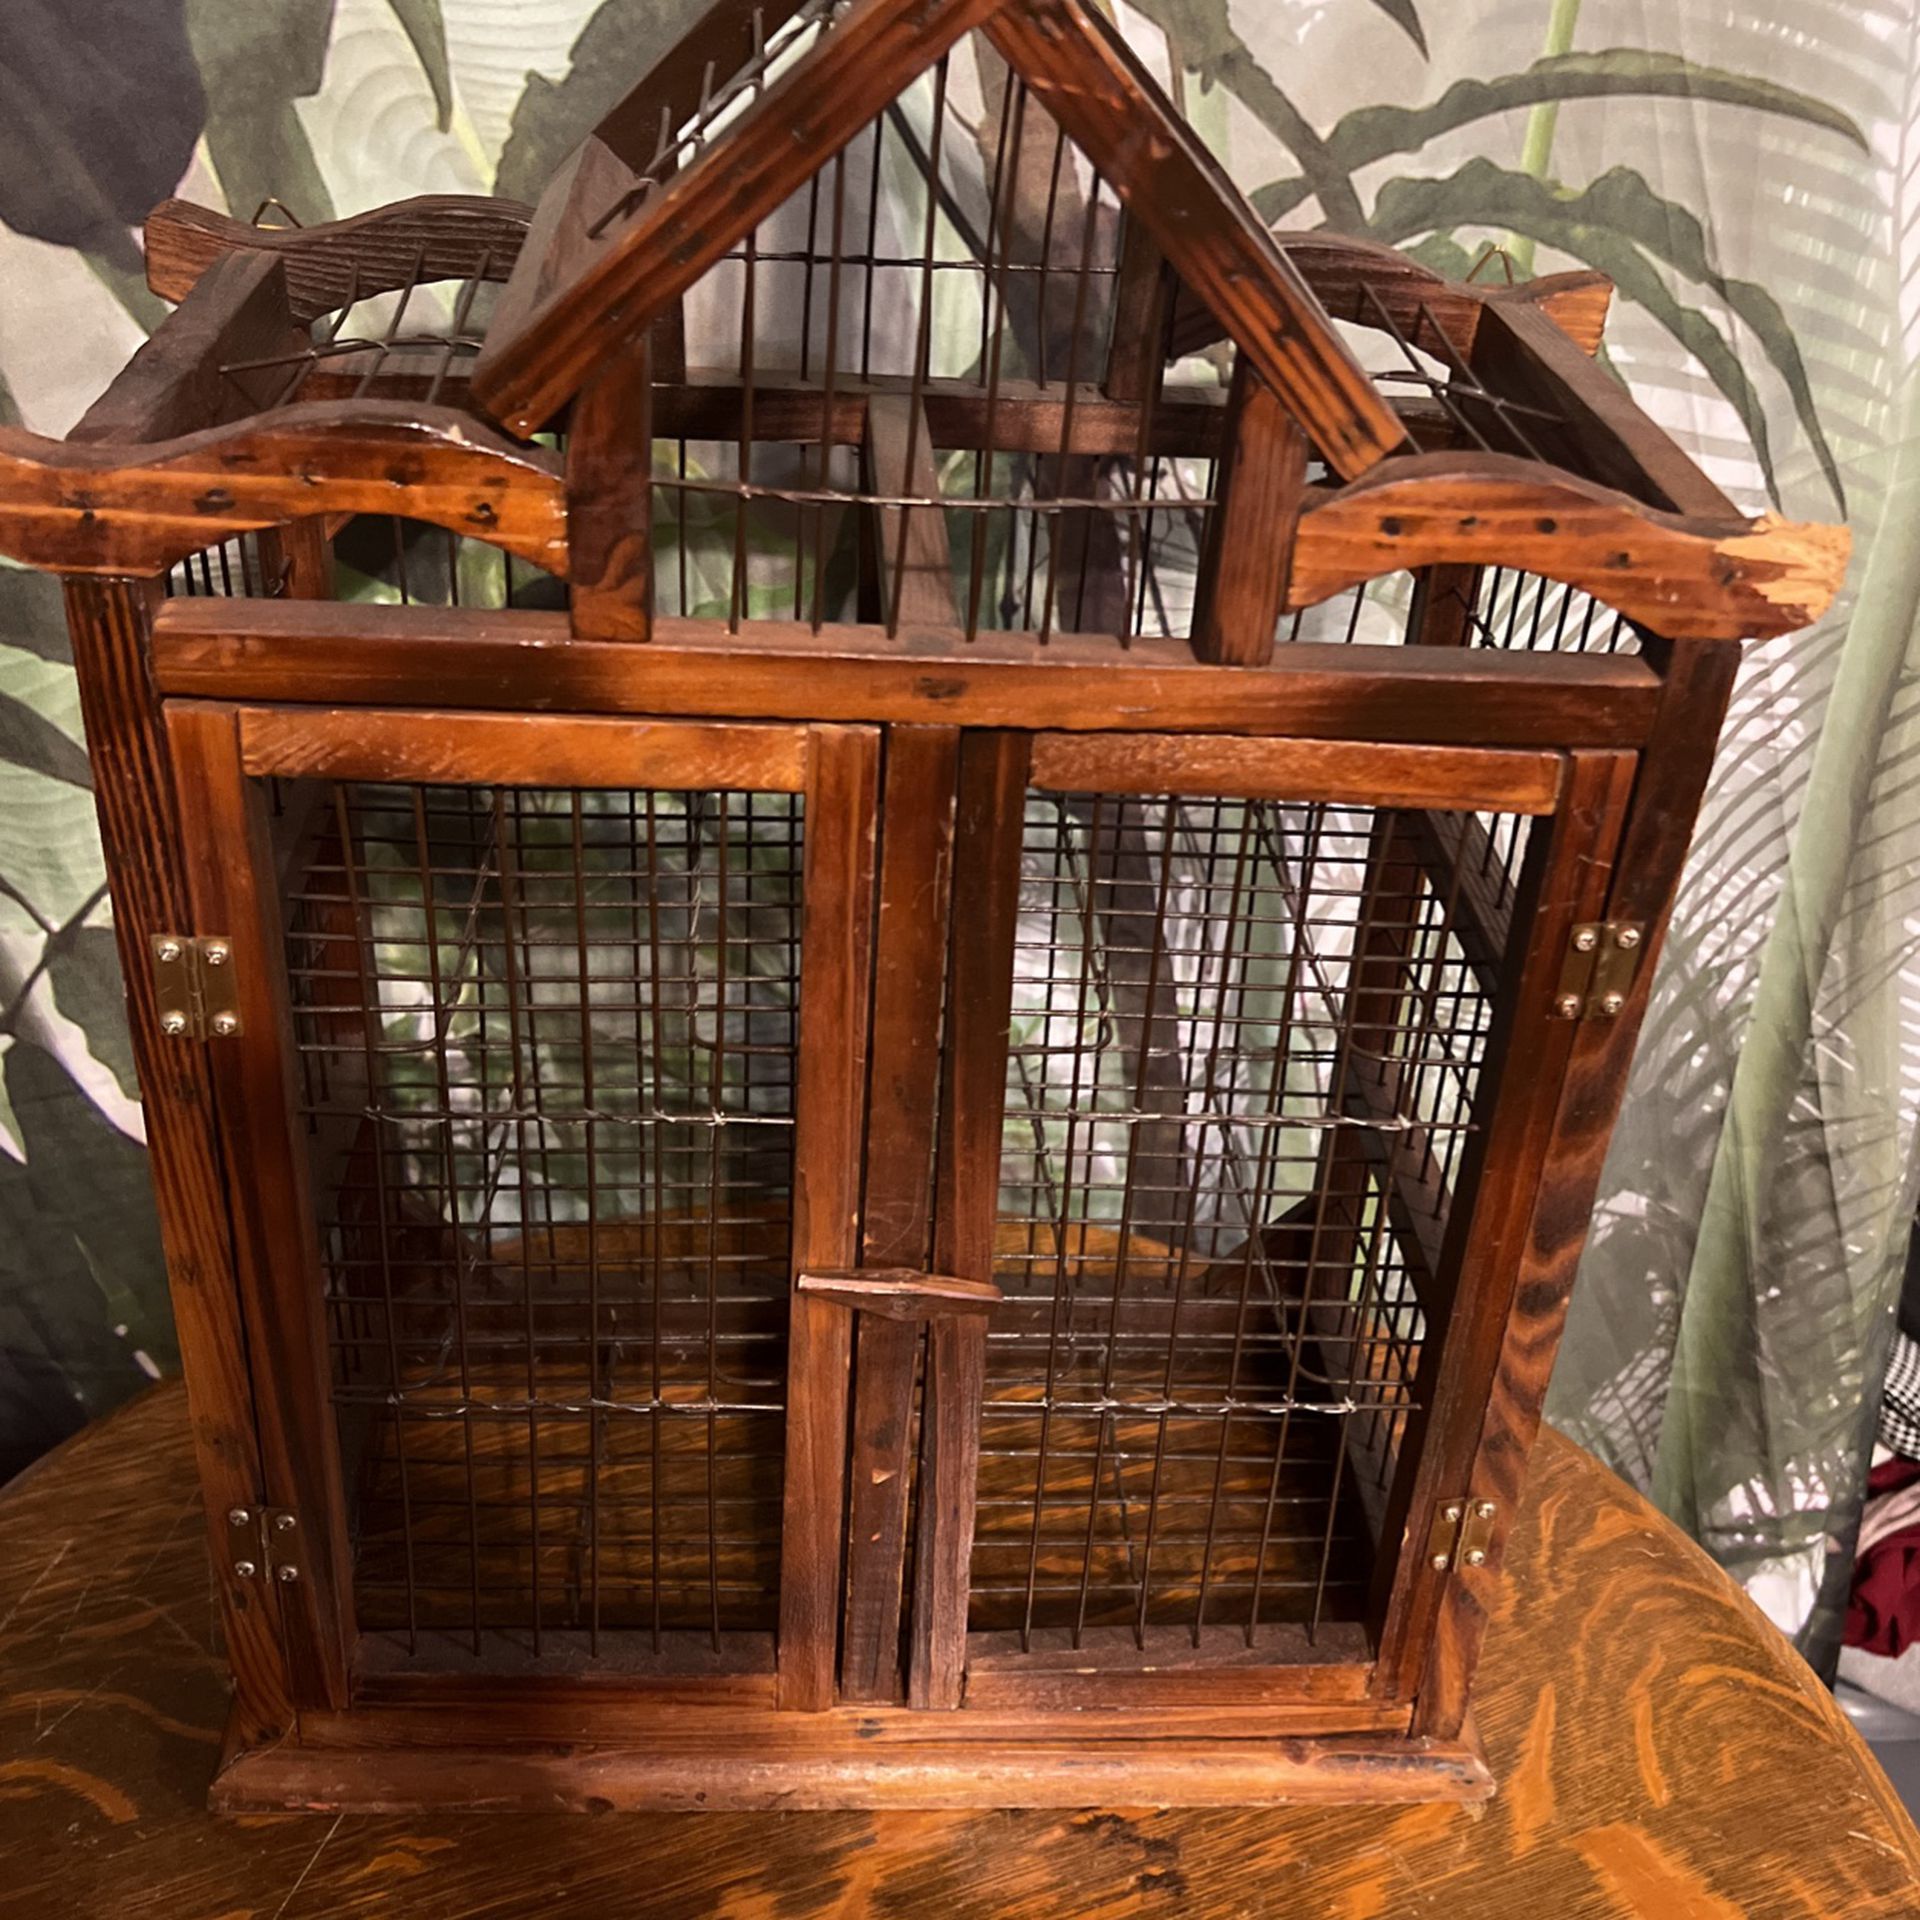 BIRD OR PET-CAGE SOLID WOOD HANDMADE BOUGHT AT ANTIQUE DEALER IN LONDON ITS 100YRS OLD! CAN HANG ON WALL OR ON A HOOK HAS BOTH KIND OF HOOKS TO HANG